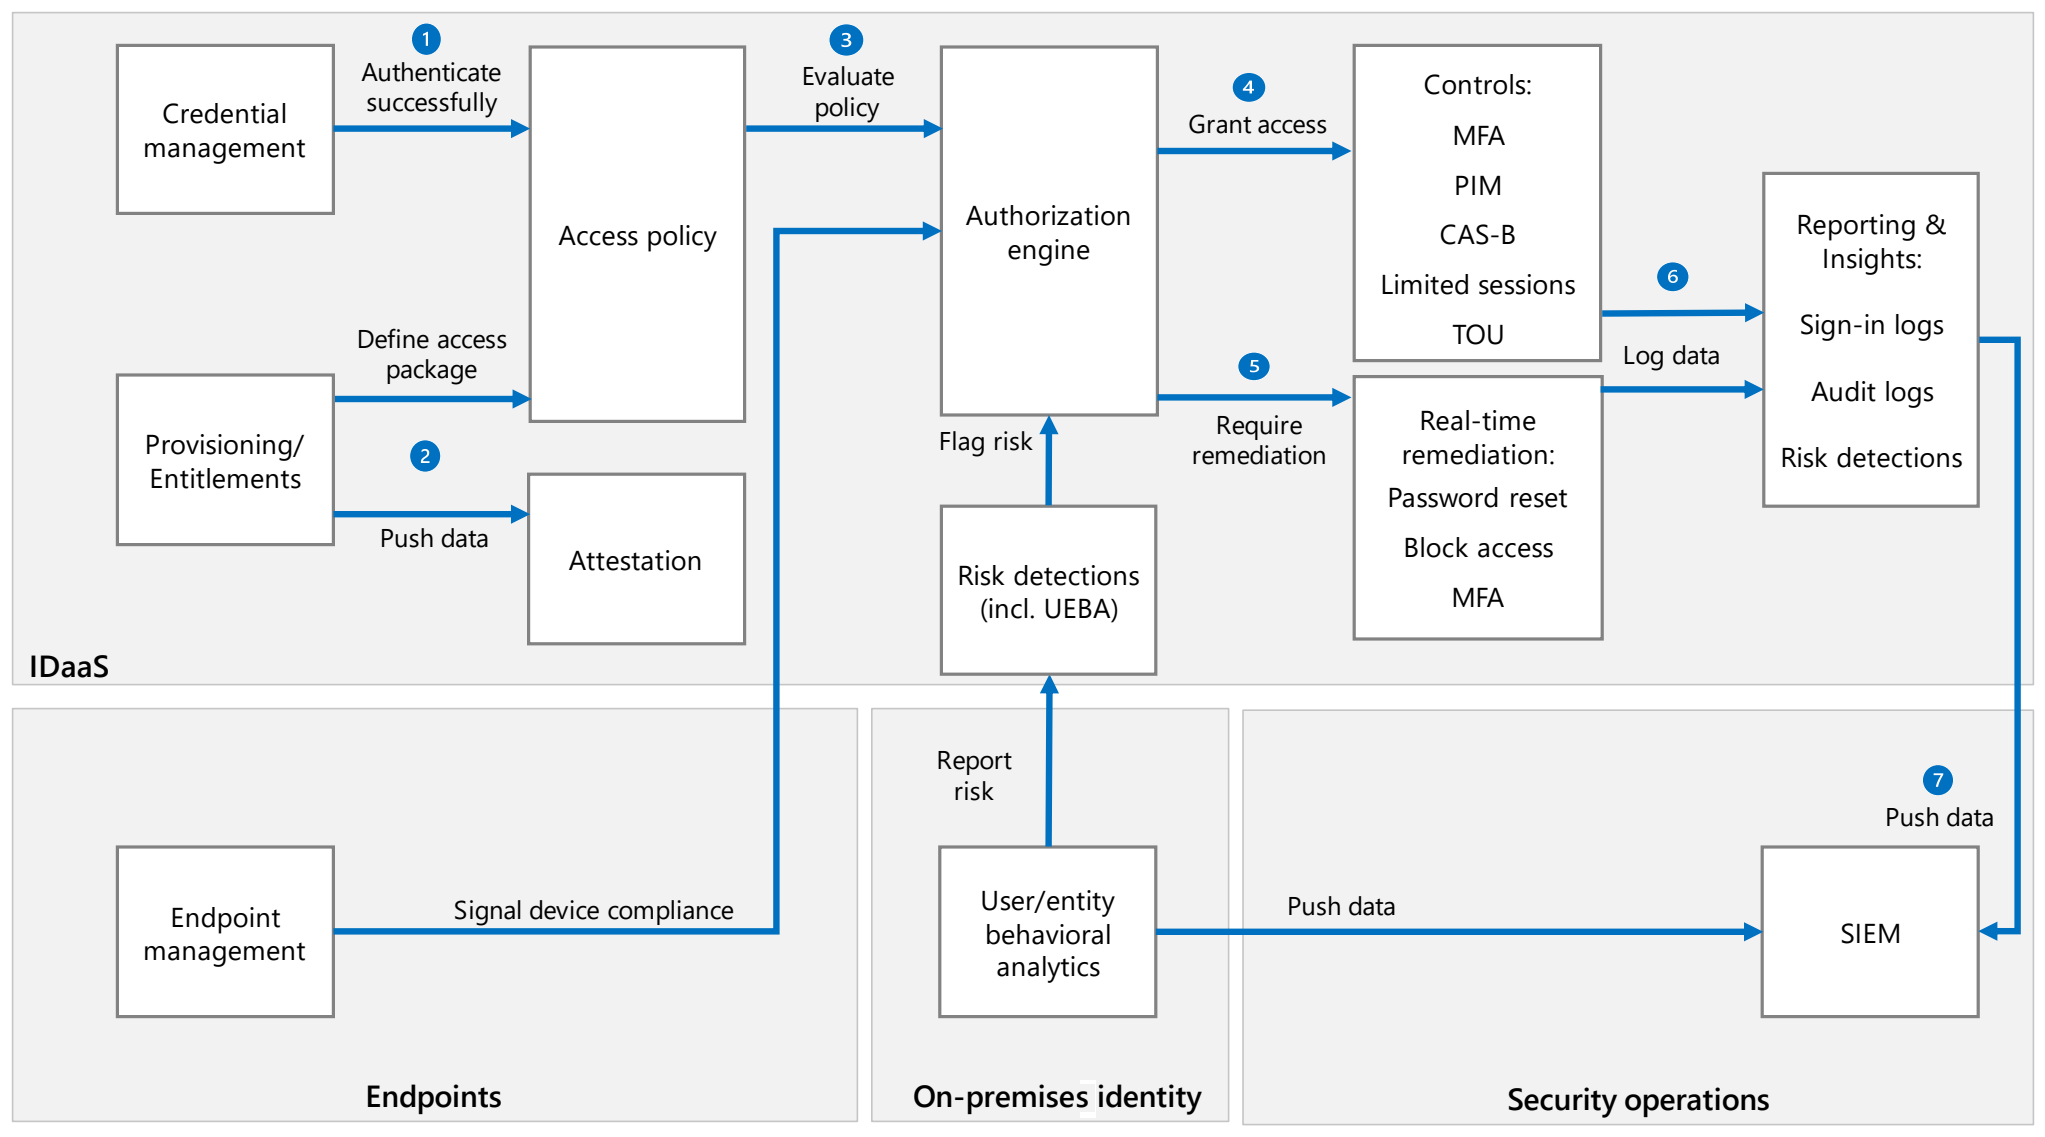 Azure AD related security capabilities